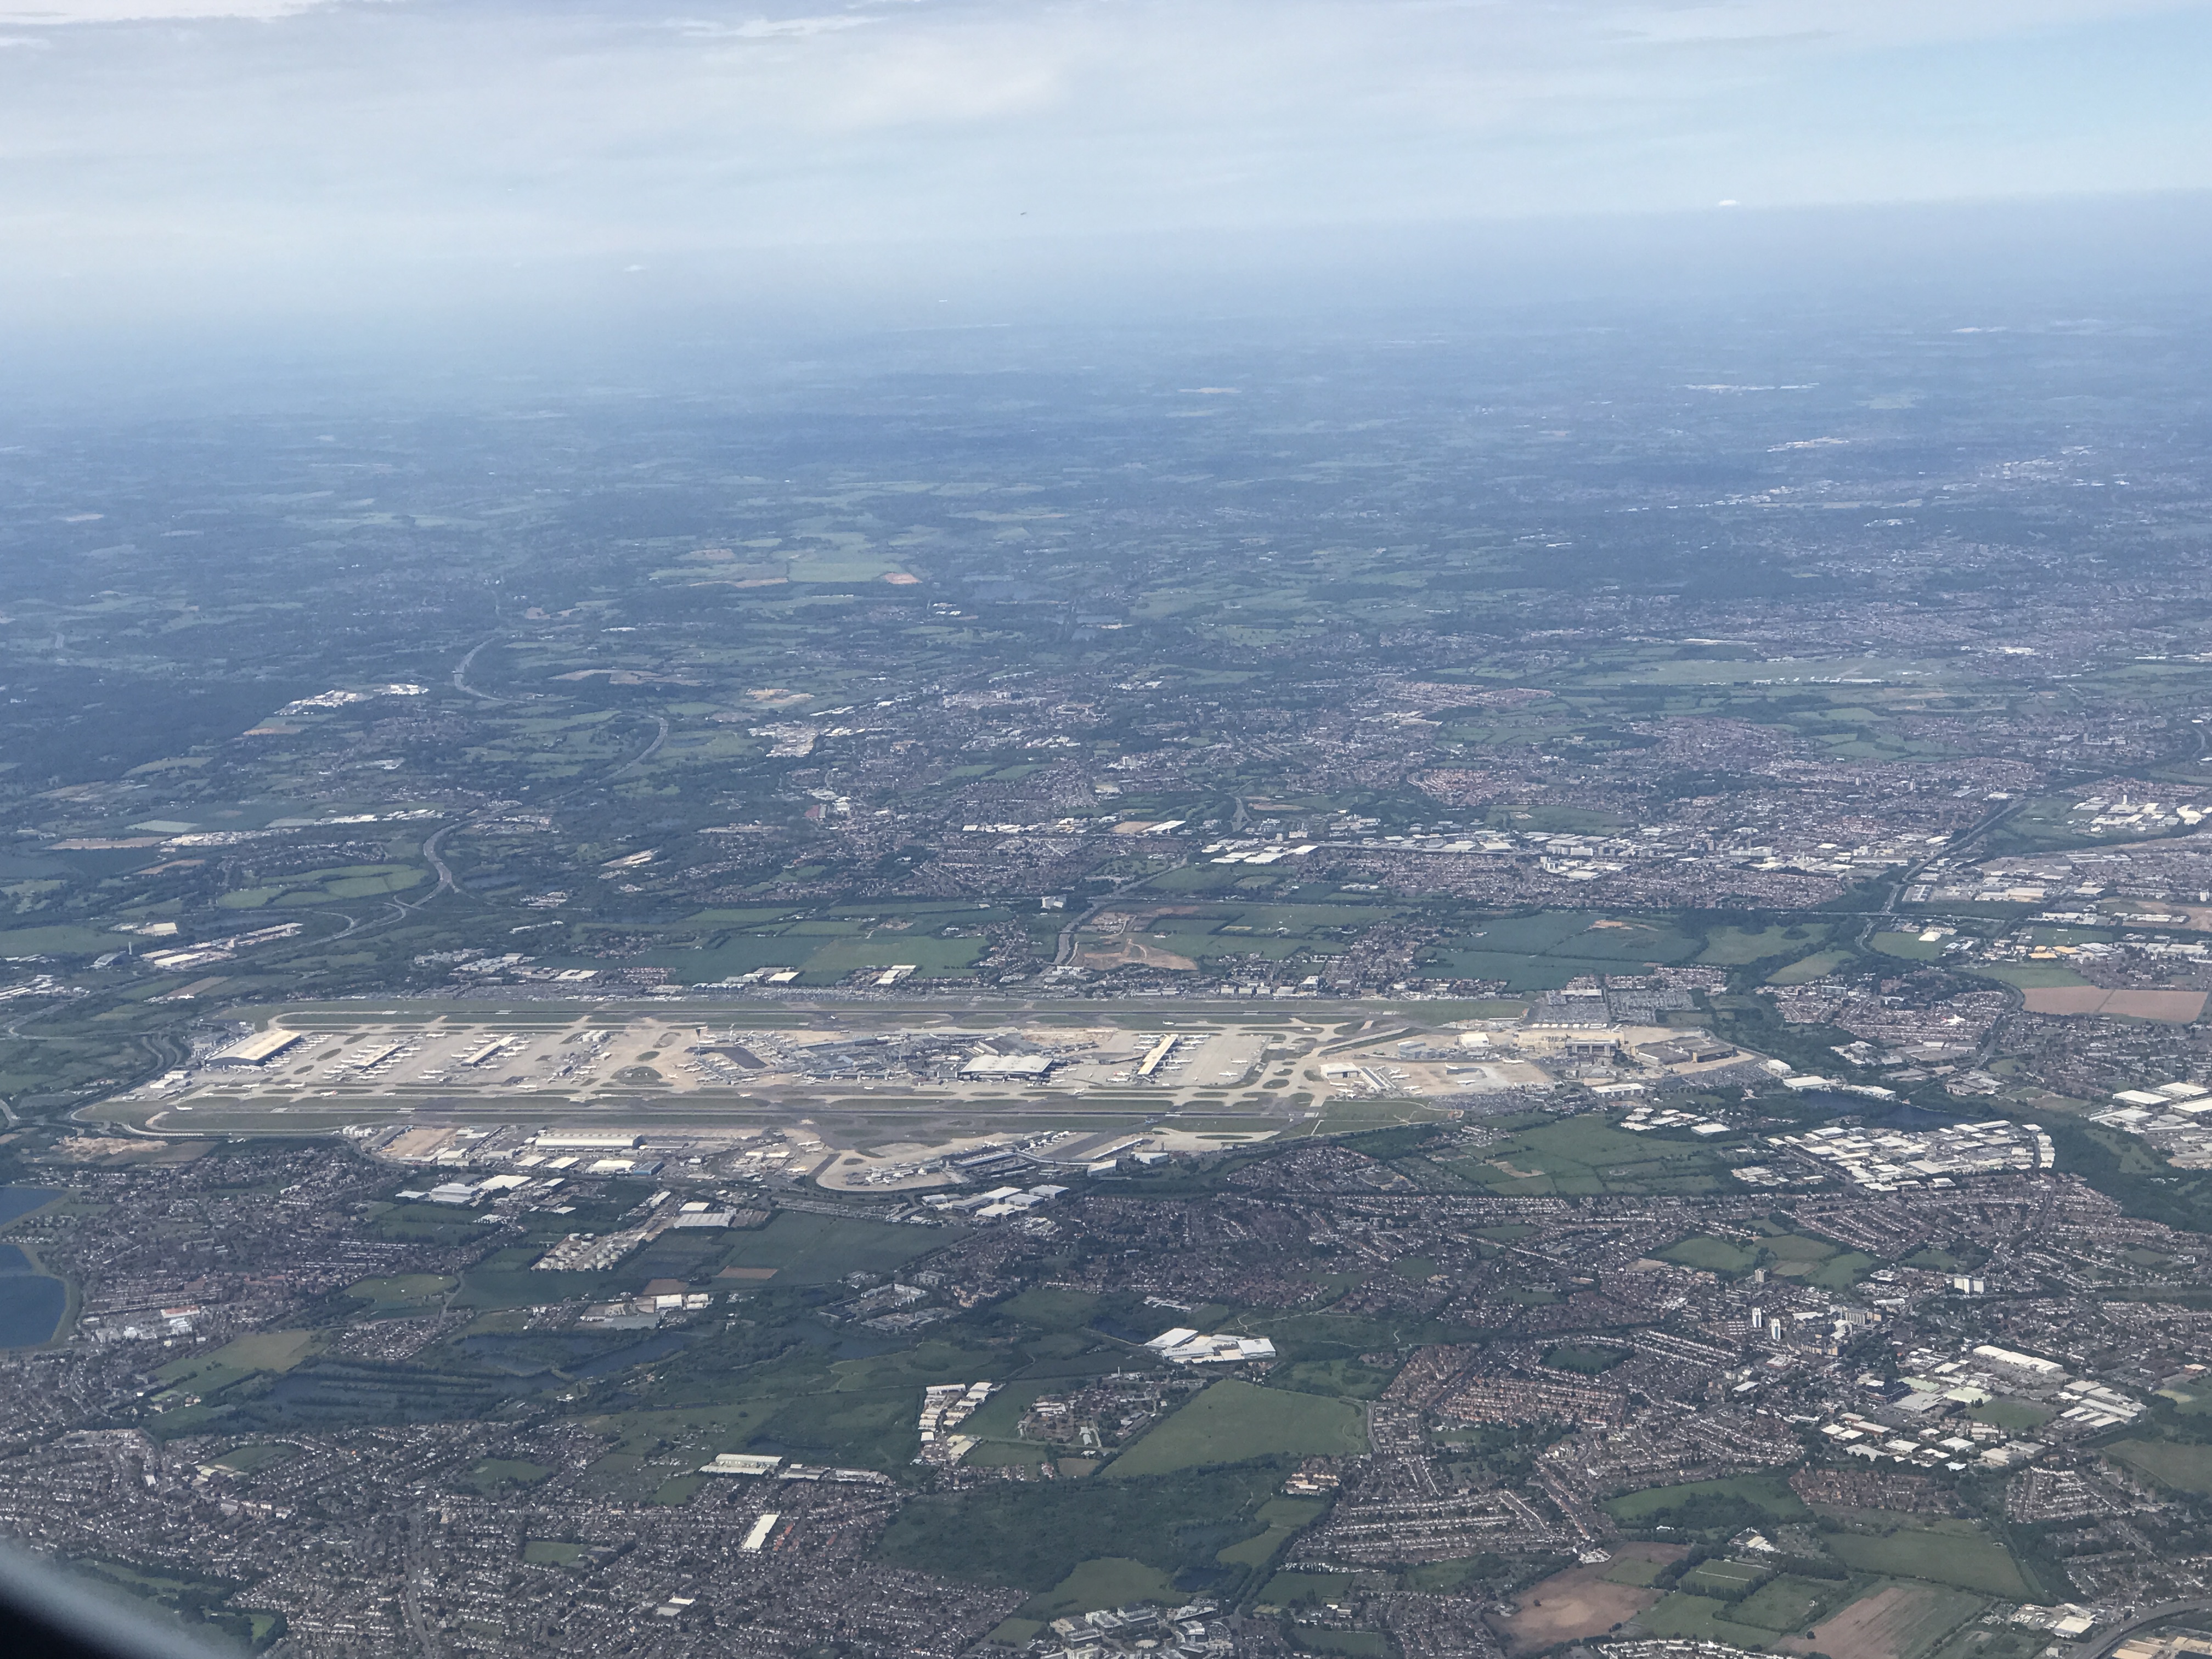 LHR from above